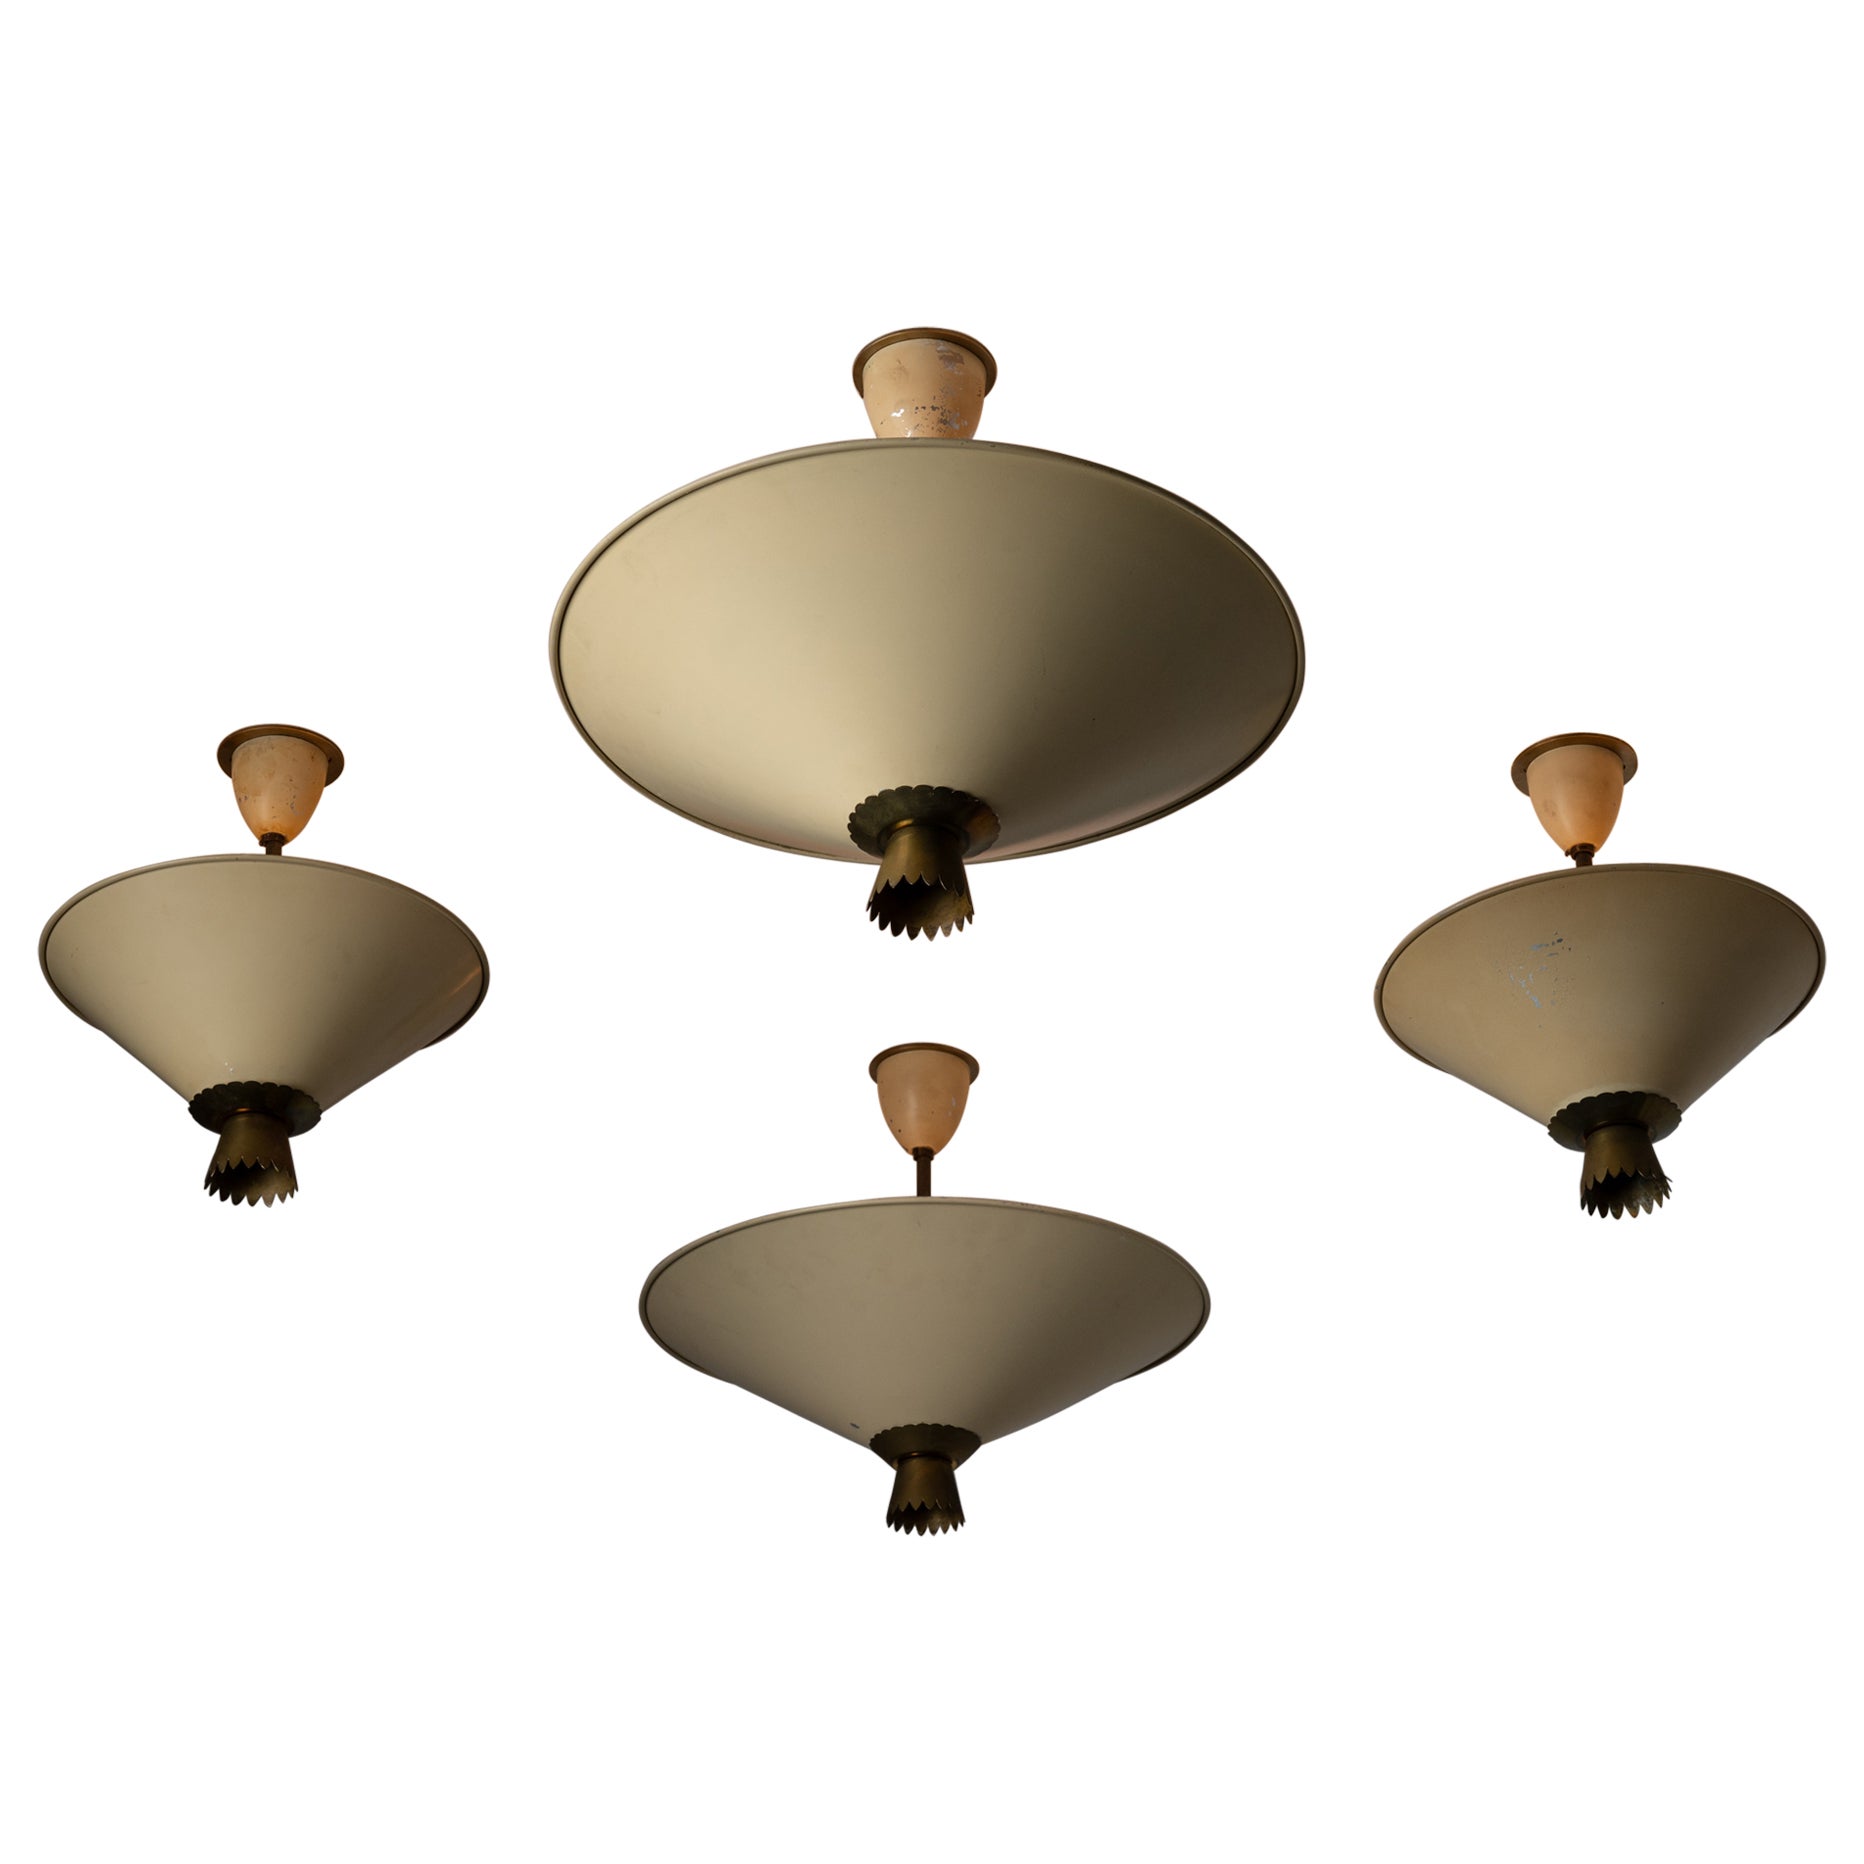 Single Flush Mount by Stilux. Designed and manufactured in Italy, circa the 1950s. Cream colored shades with aged brass bottom scalloped accent. Each fixture holds a tri-socket, adapted for the US. We recommend 40w max bulbs. Bulbs not provided.